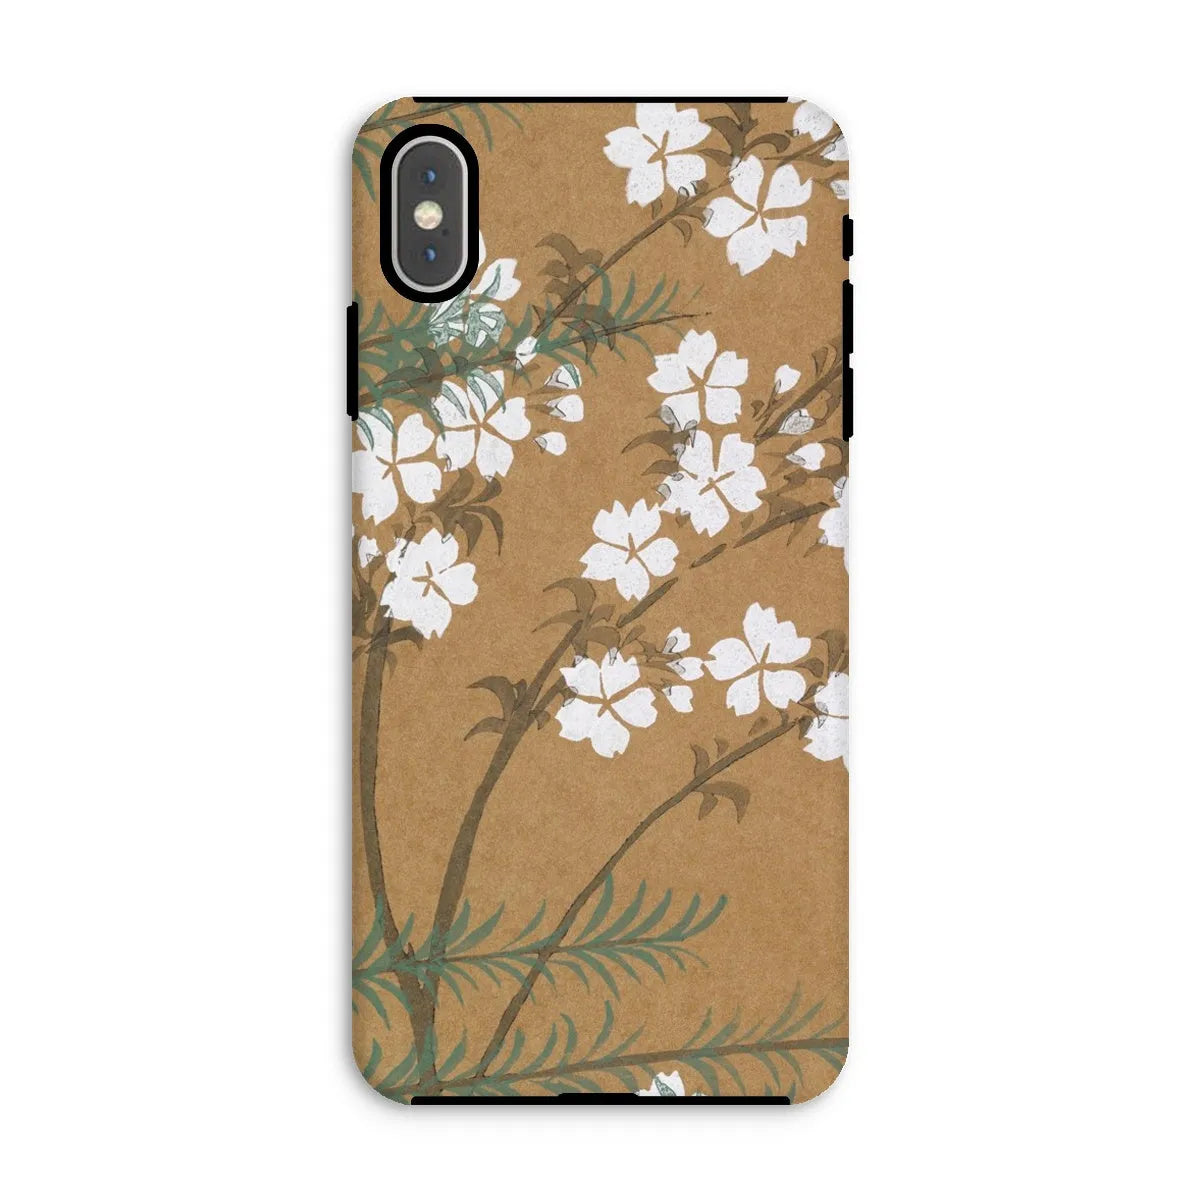 Blossoms From Momoyogusa Floral Phone Case - Kamisaka Sekka - Iphone Xs Max / Matte - Mobile Phone Cases - Aesthetic Art